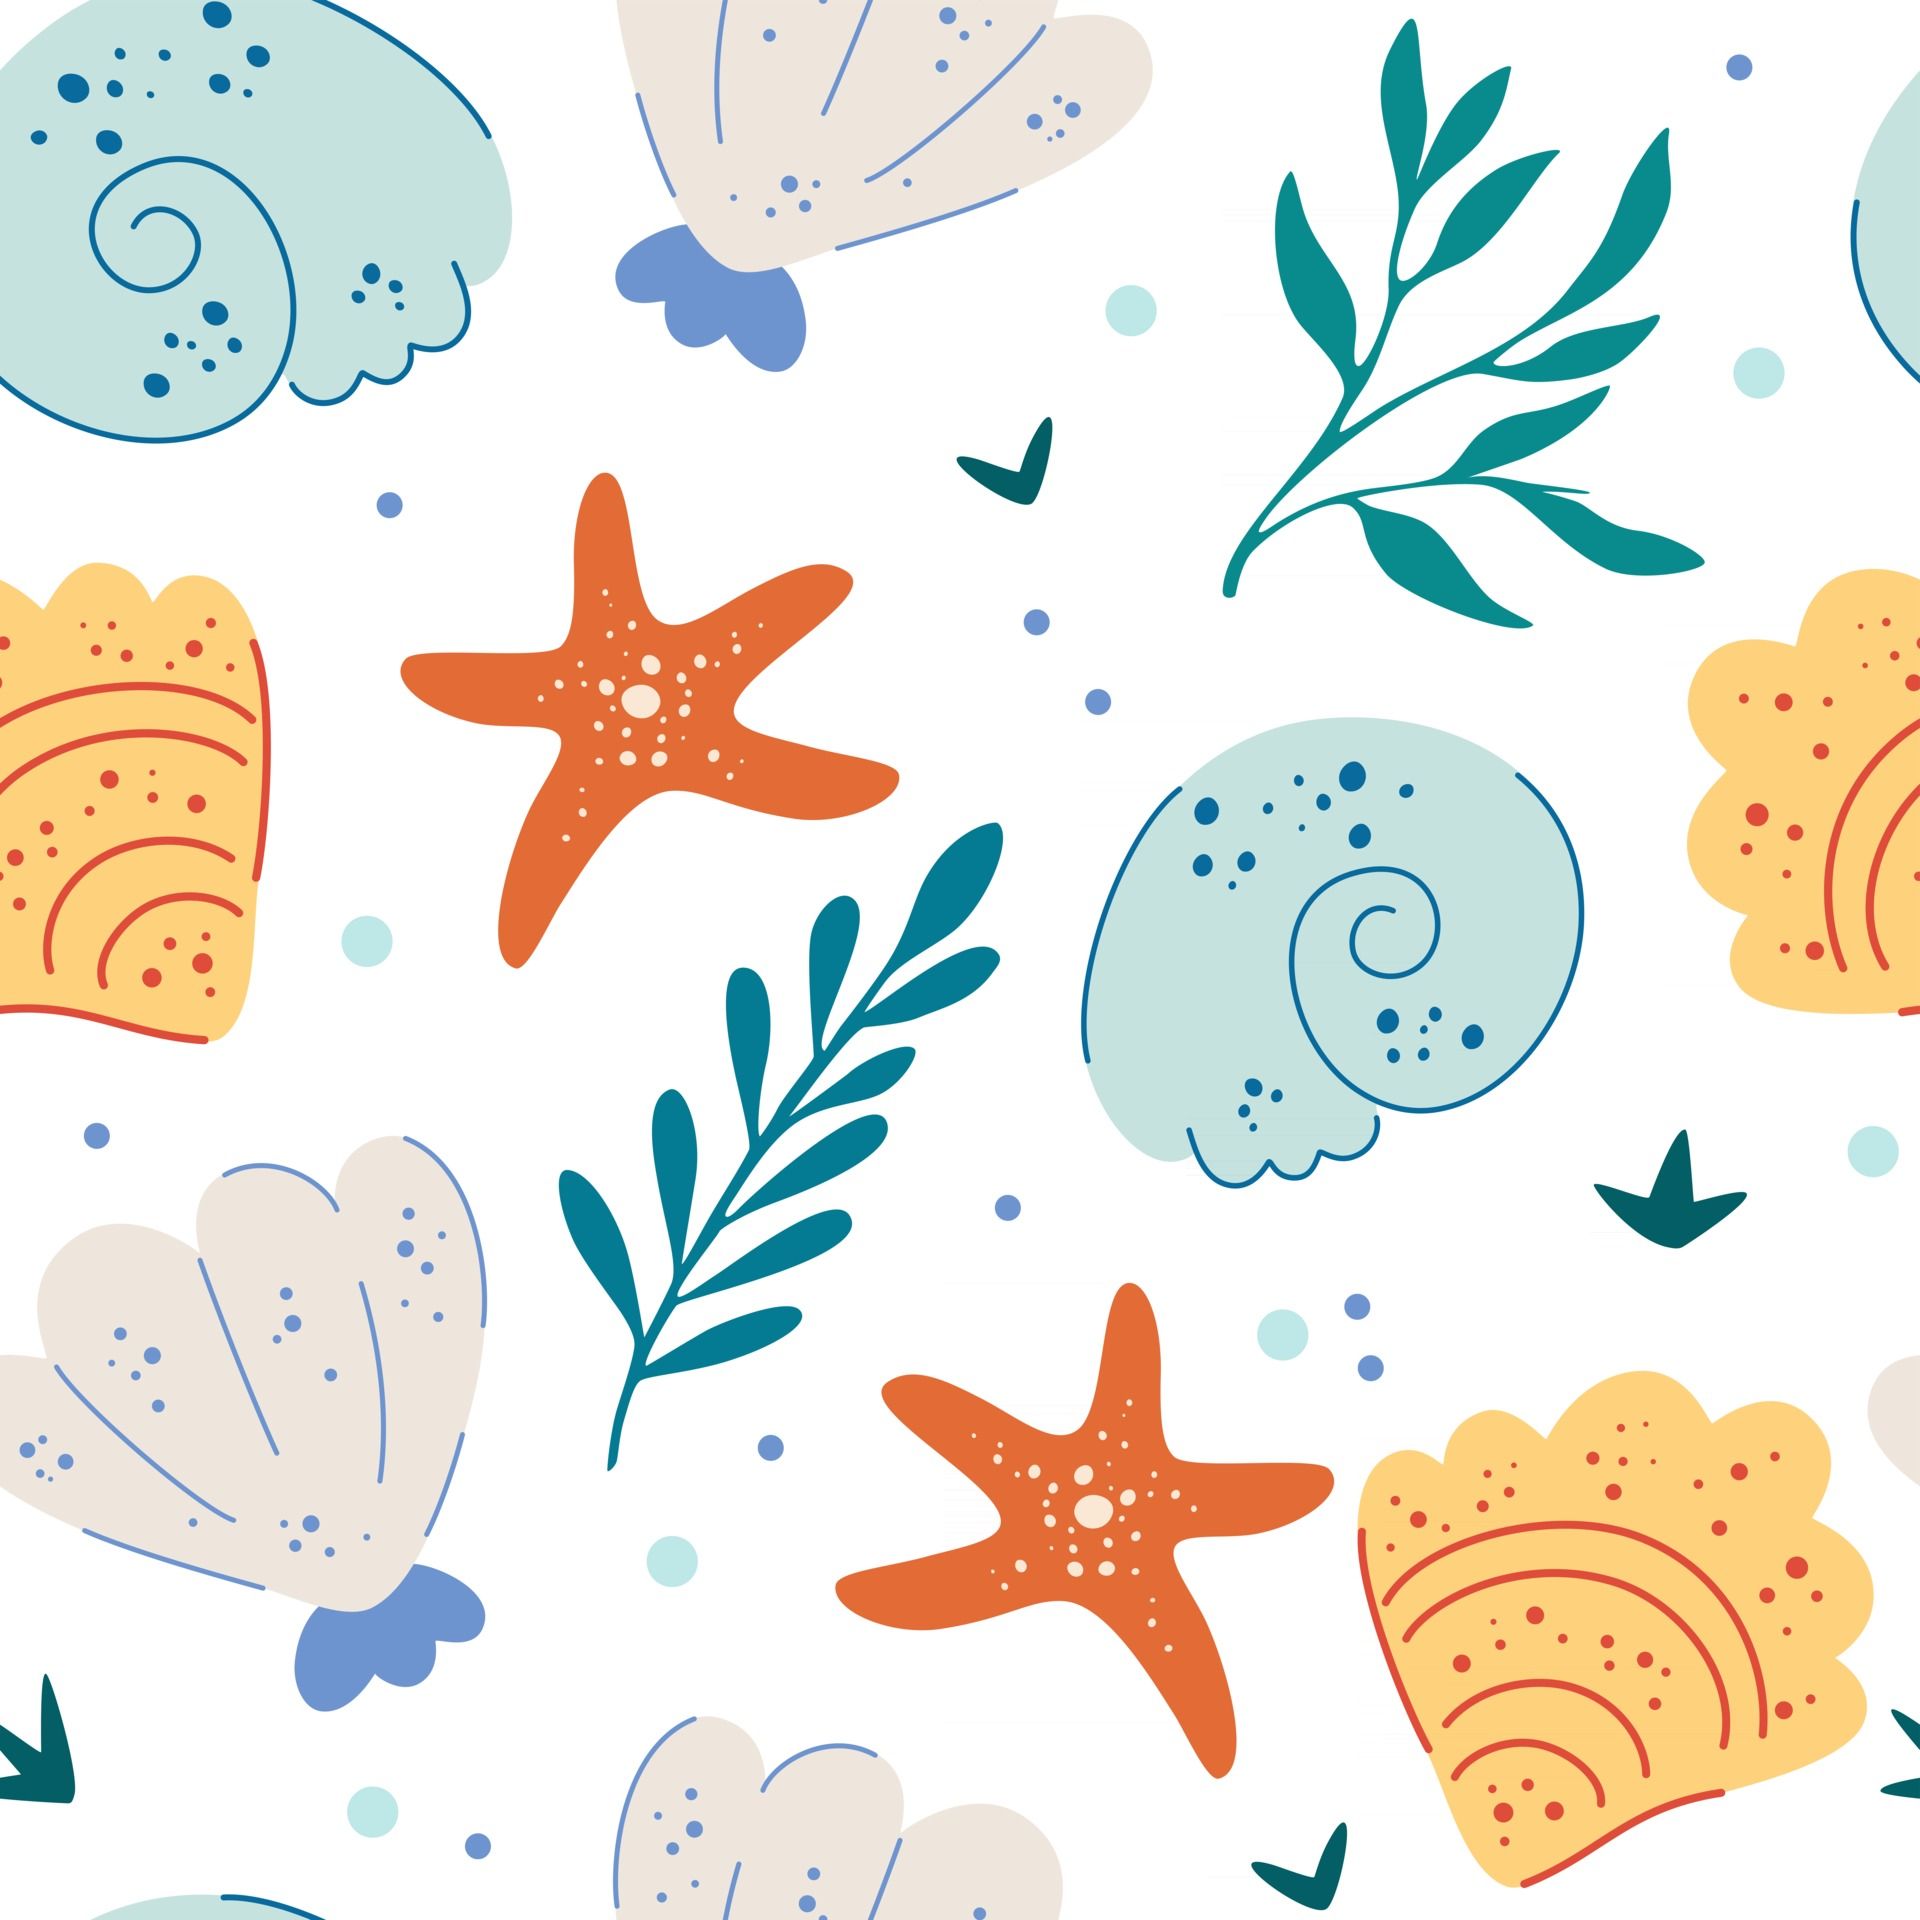 Sea shells and starfish seamless pattern Cute ocean background Fun underwater background great for ocean themes beach fabrics summer textiles or background wallpaper Flat vector illustration